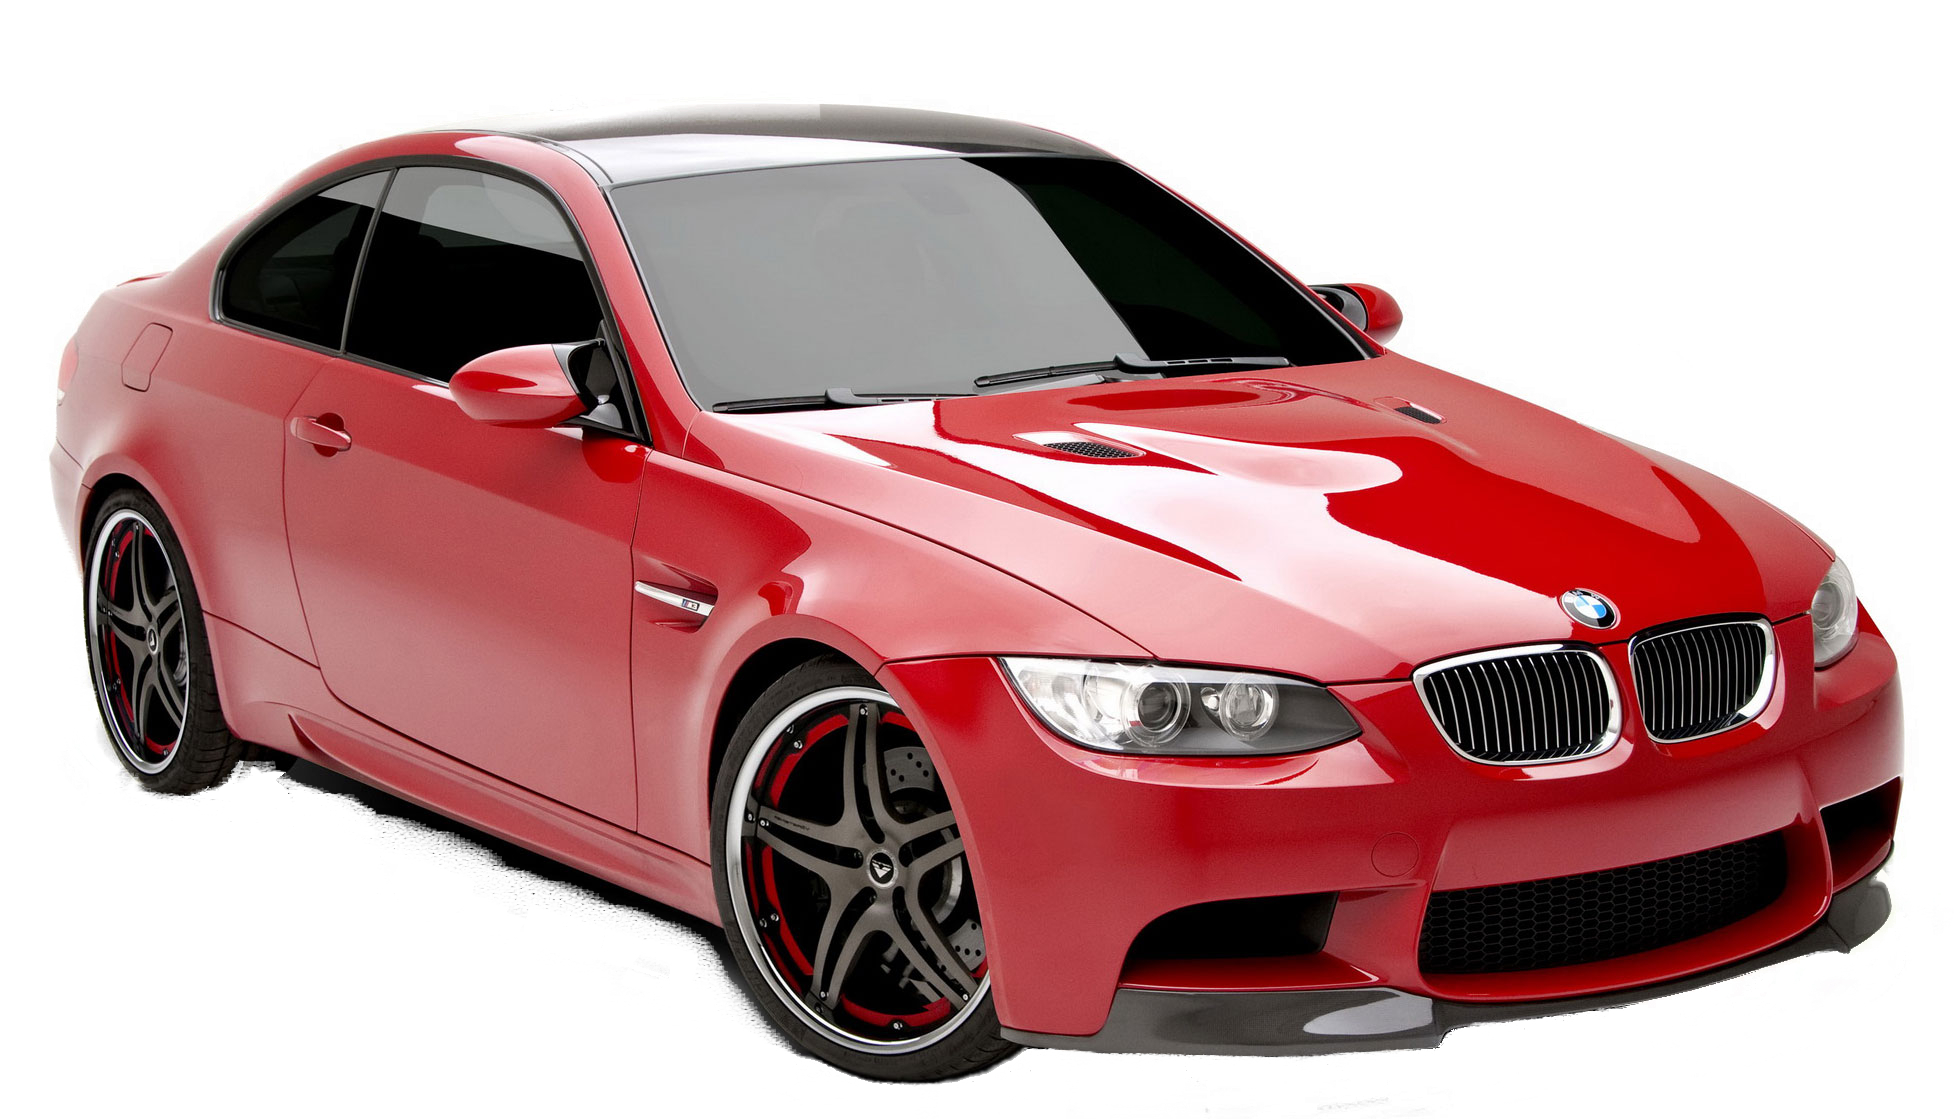 Download Bmw Picture Hq Png Image Freepngimg